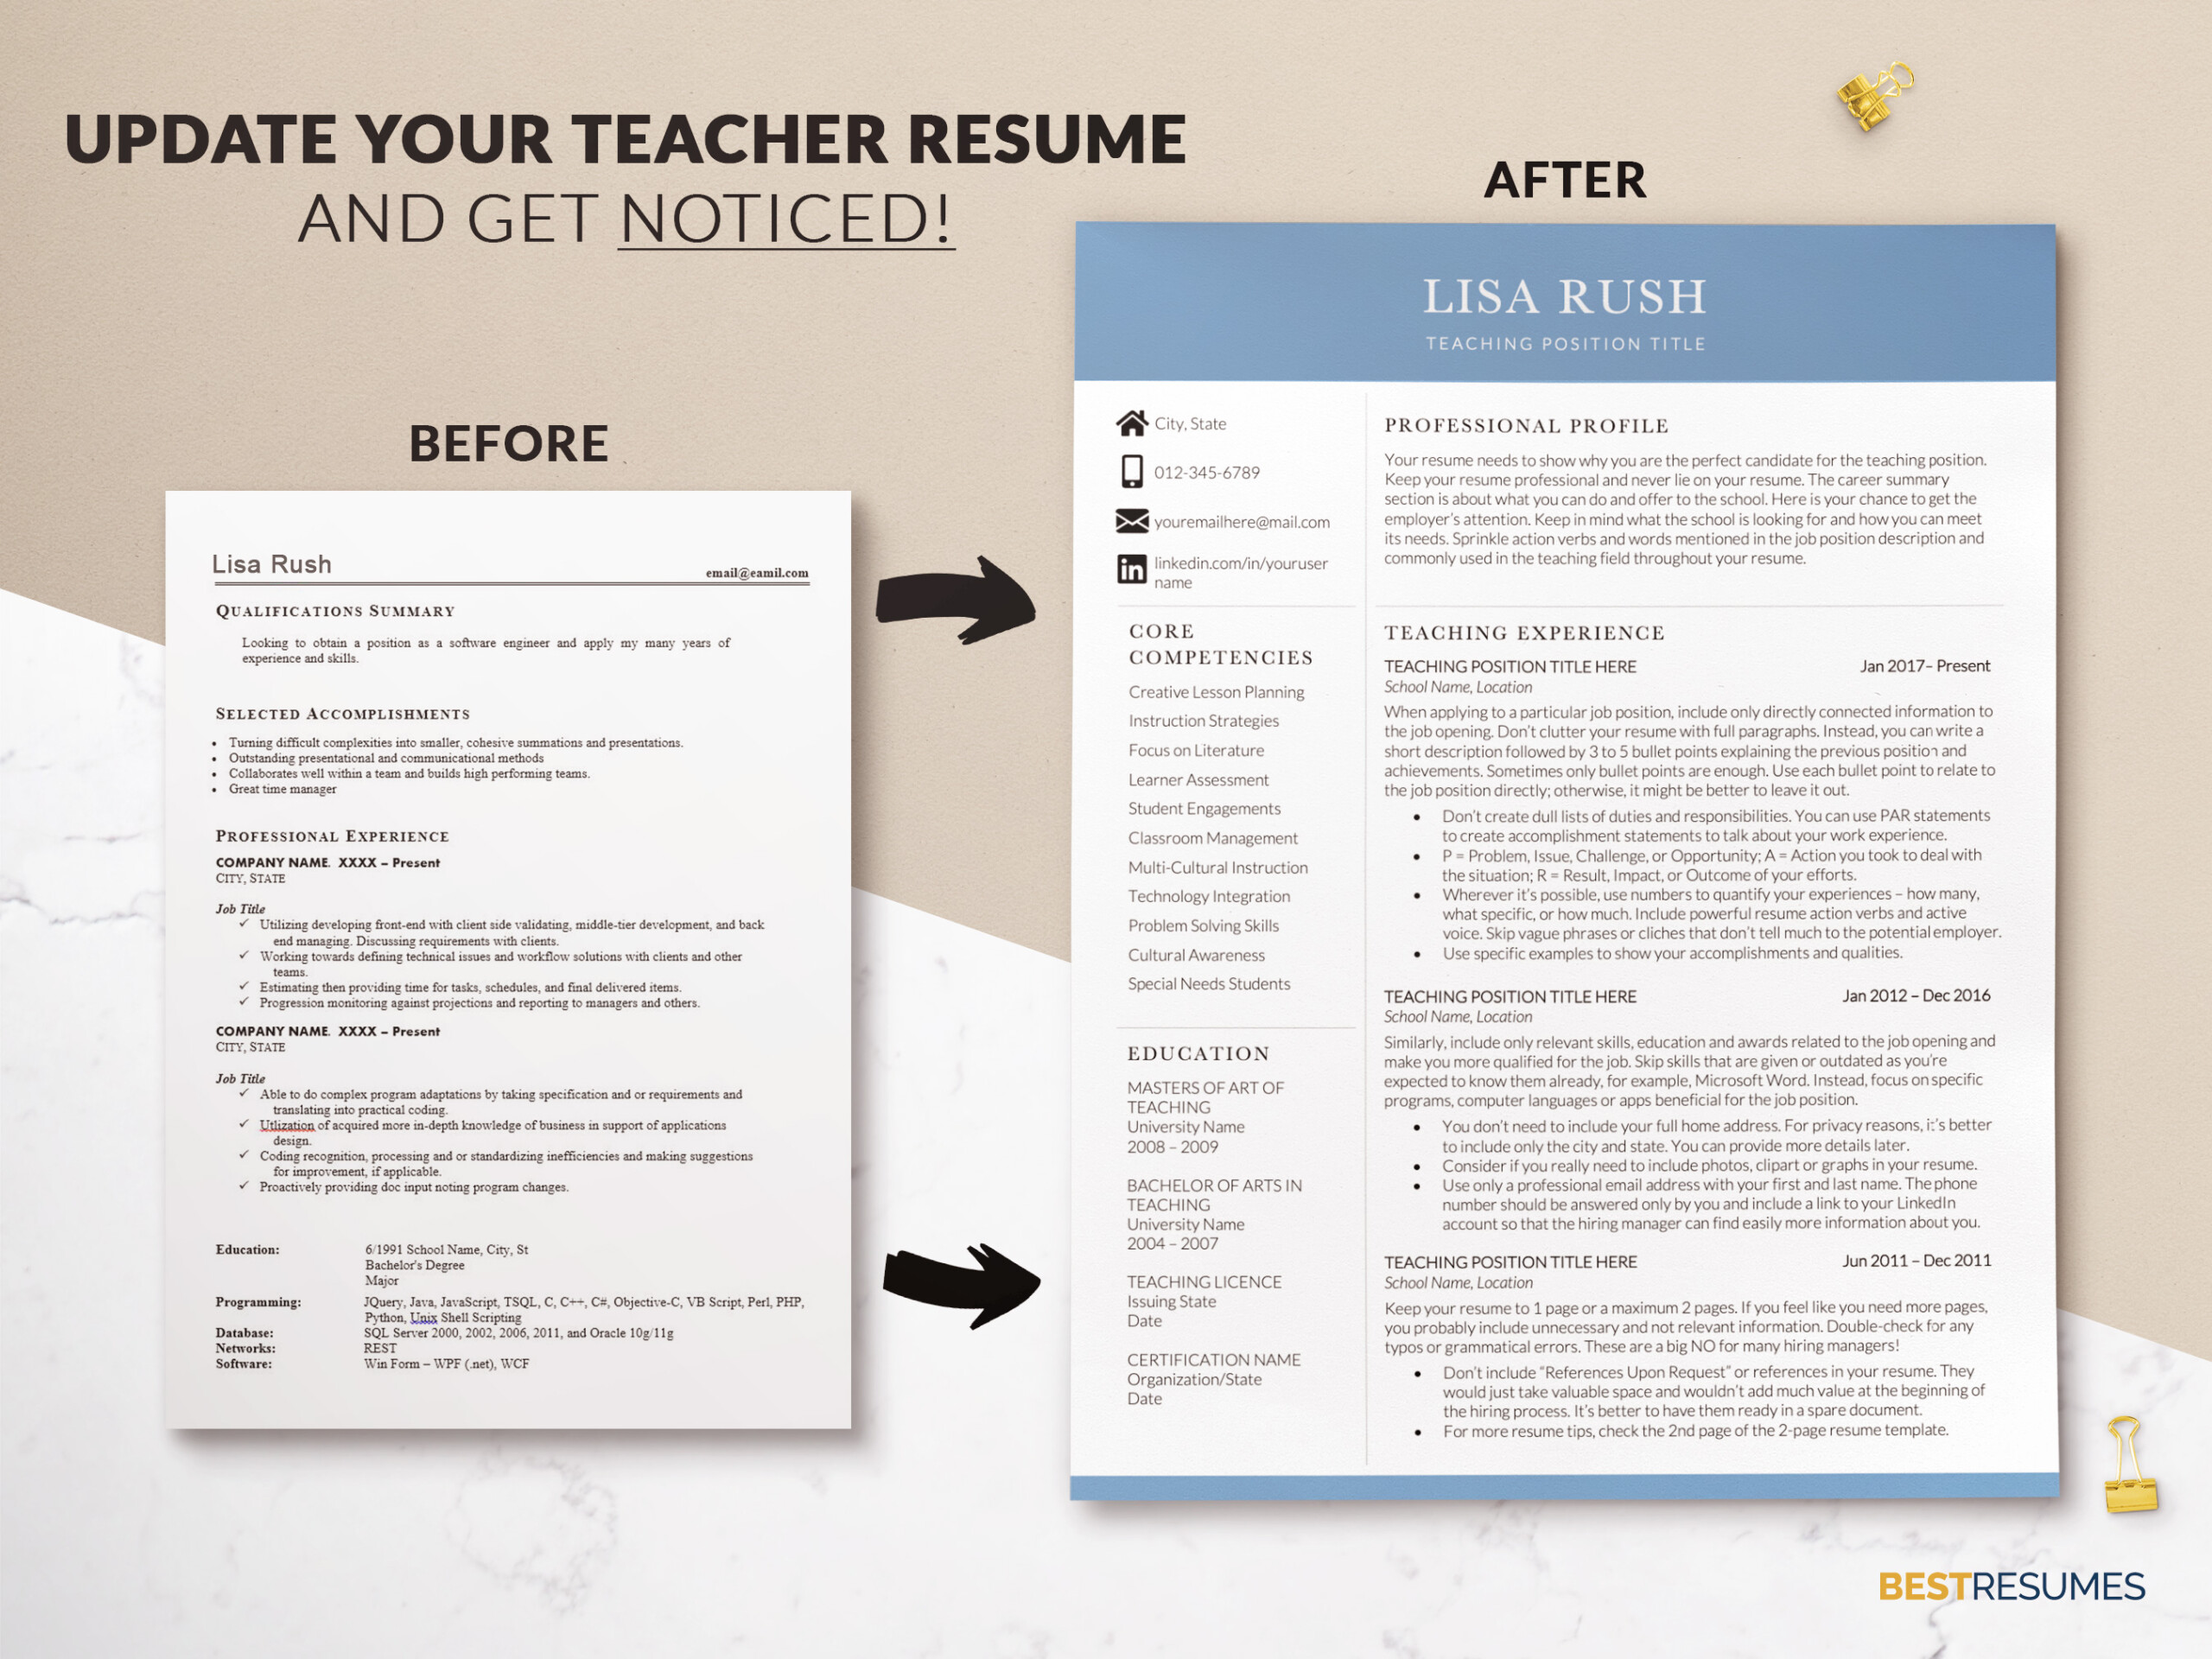 Professional Educator CV Template and Cover Letter Update your Teacher Resume Lisa Rush